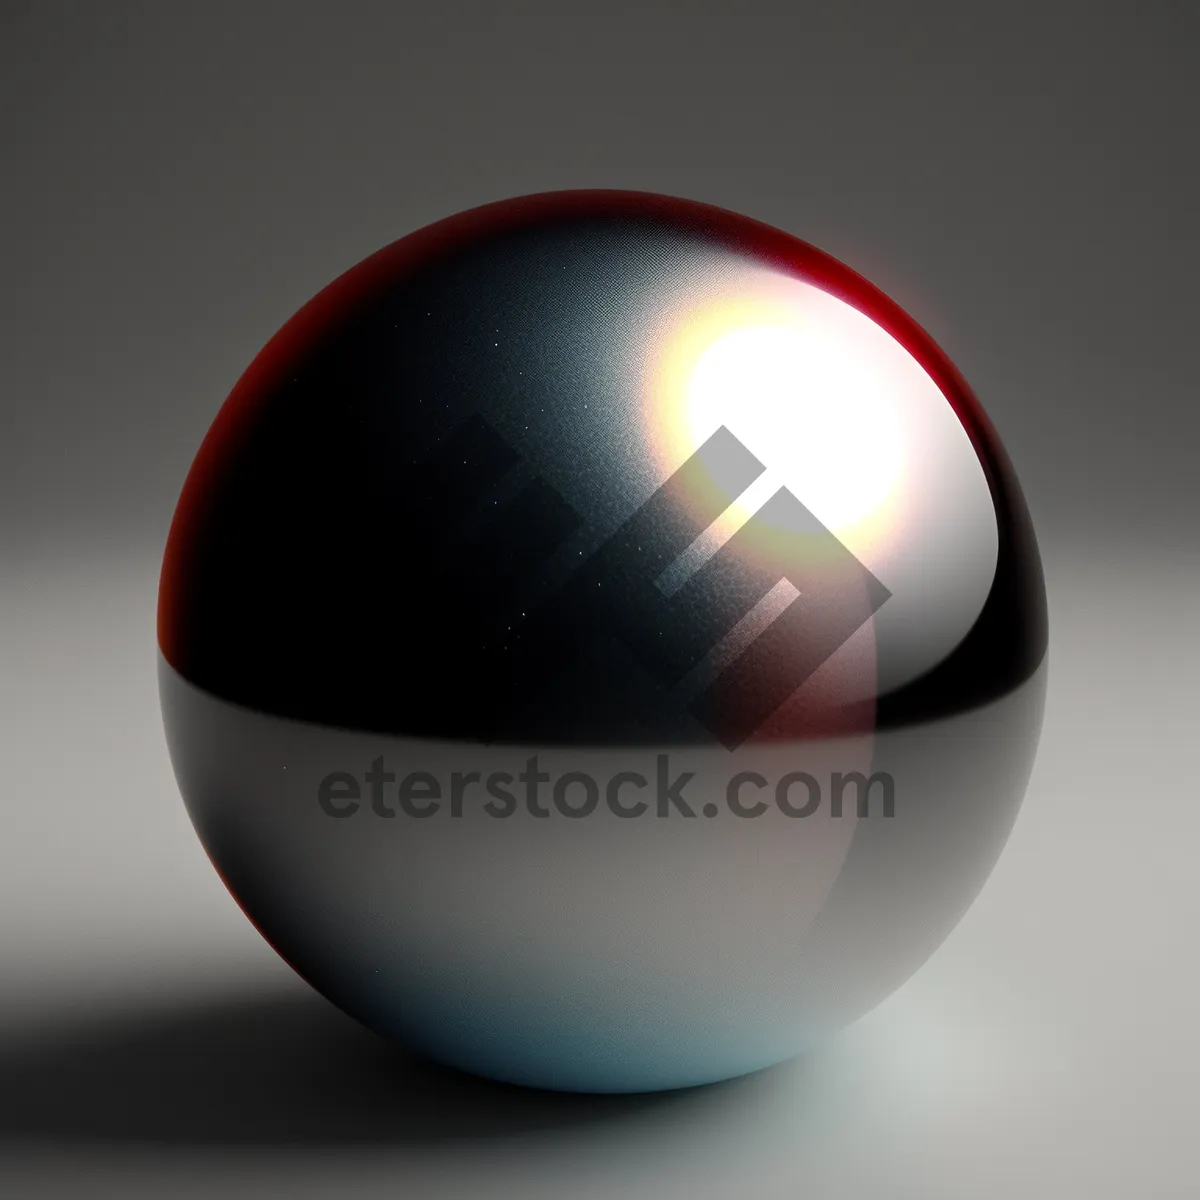 Picture of Egg-shaped Glass Sphere with Shiny 3D Reflection